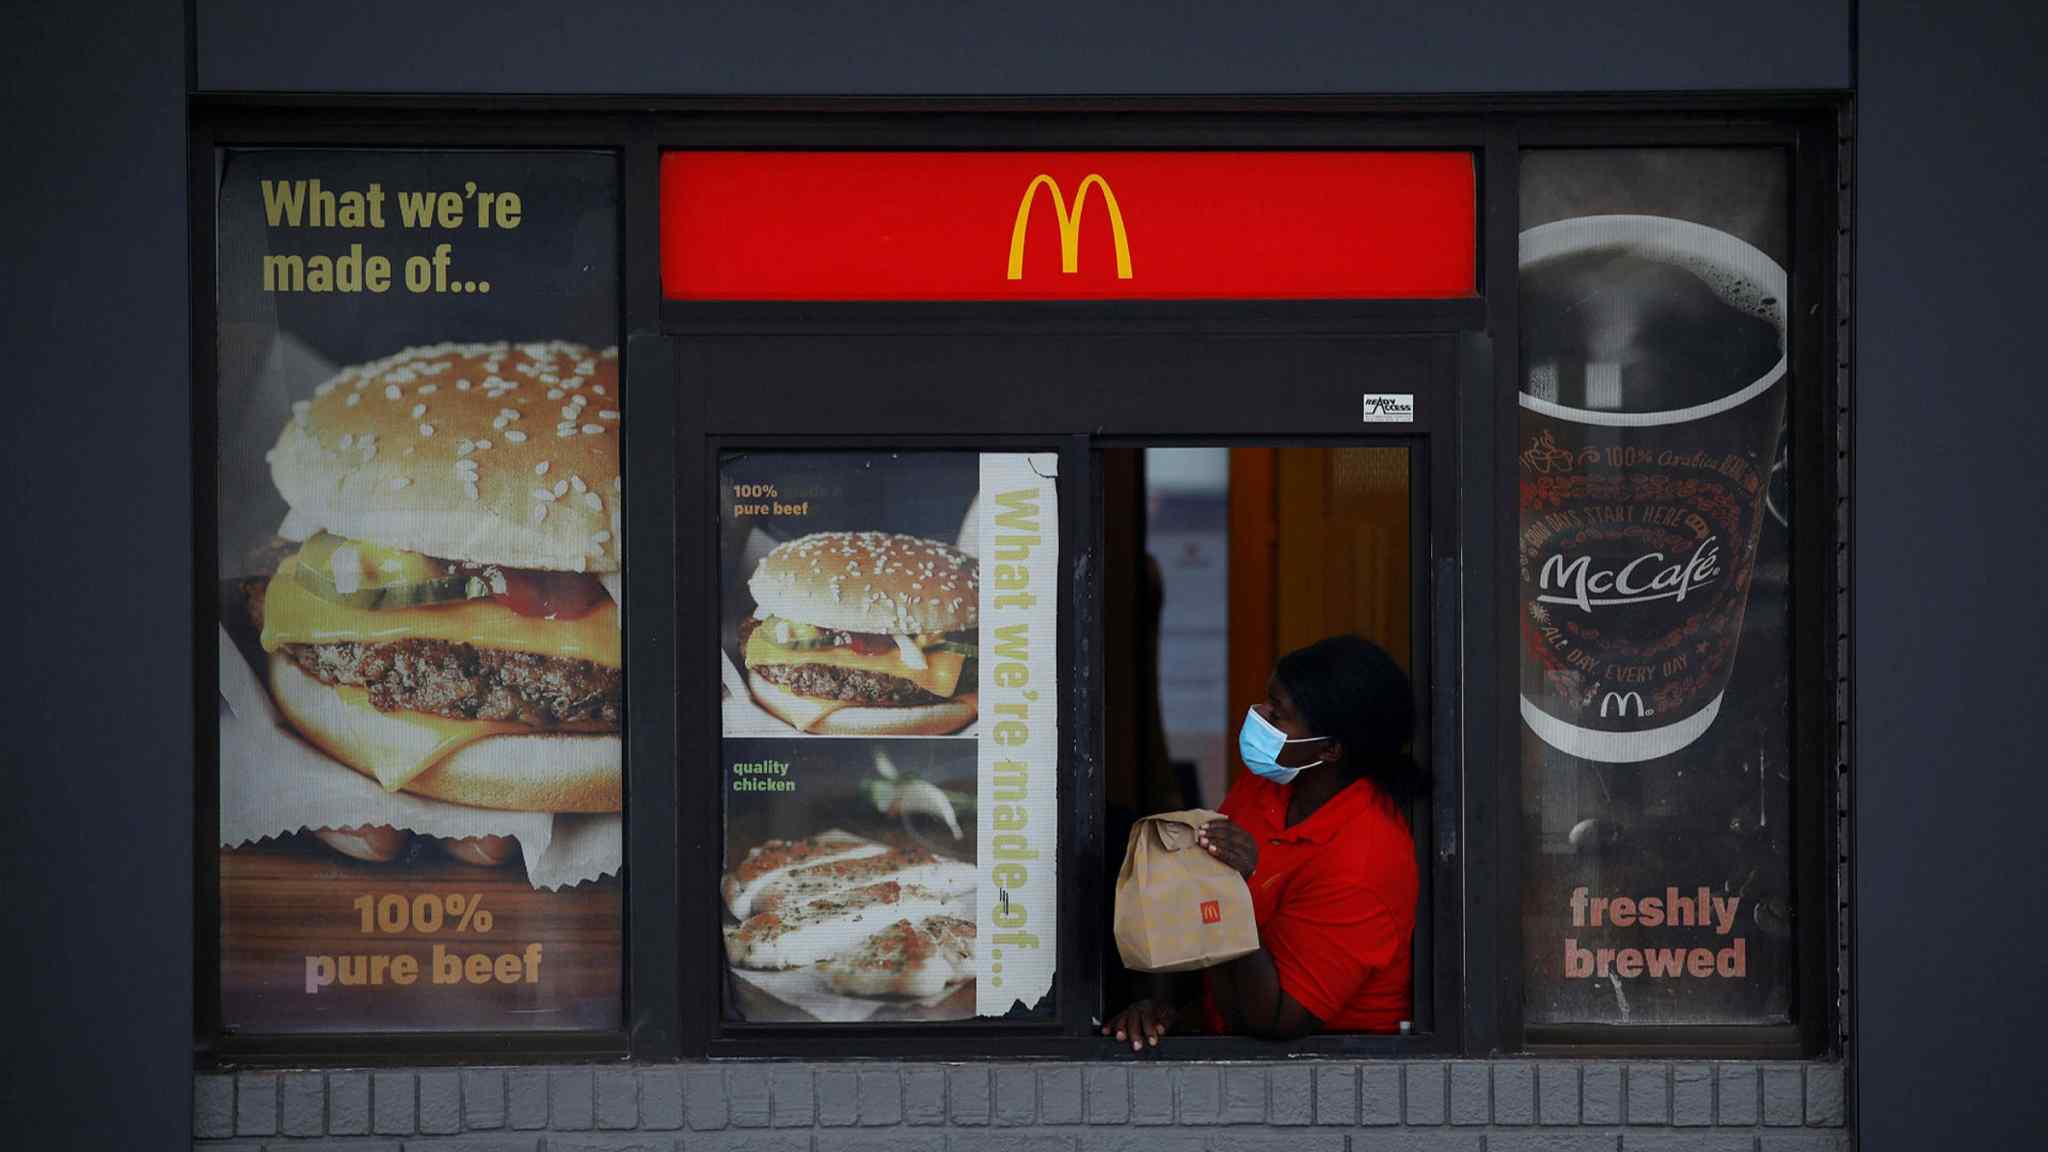 Live news: McDonald’s sales growth falls short after Covid lockdowns in China